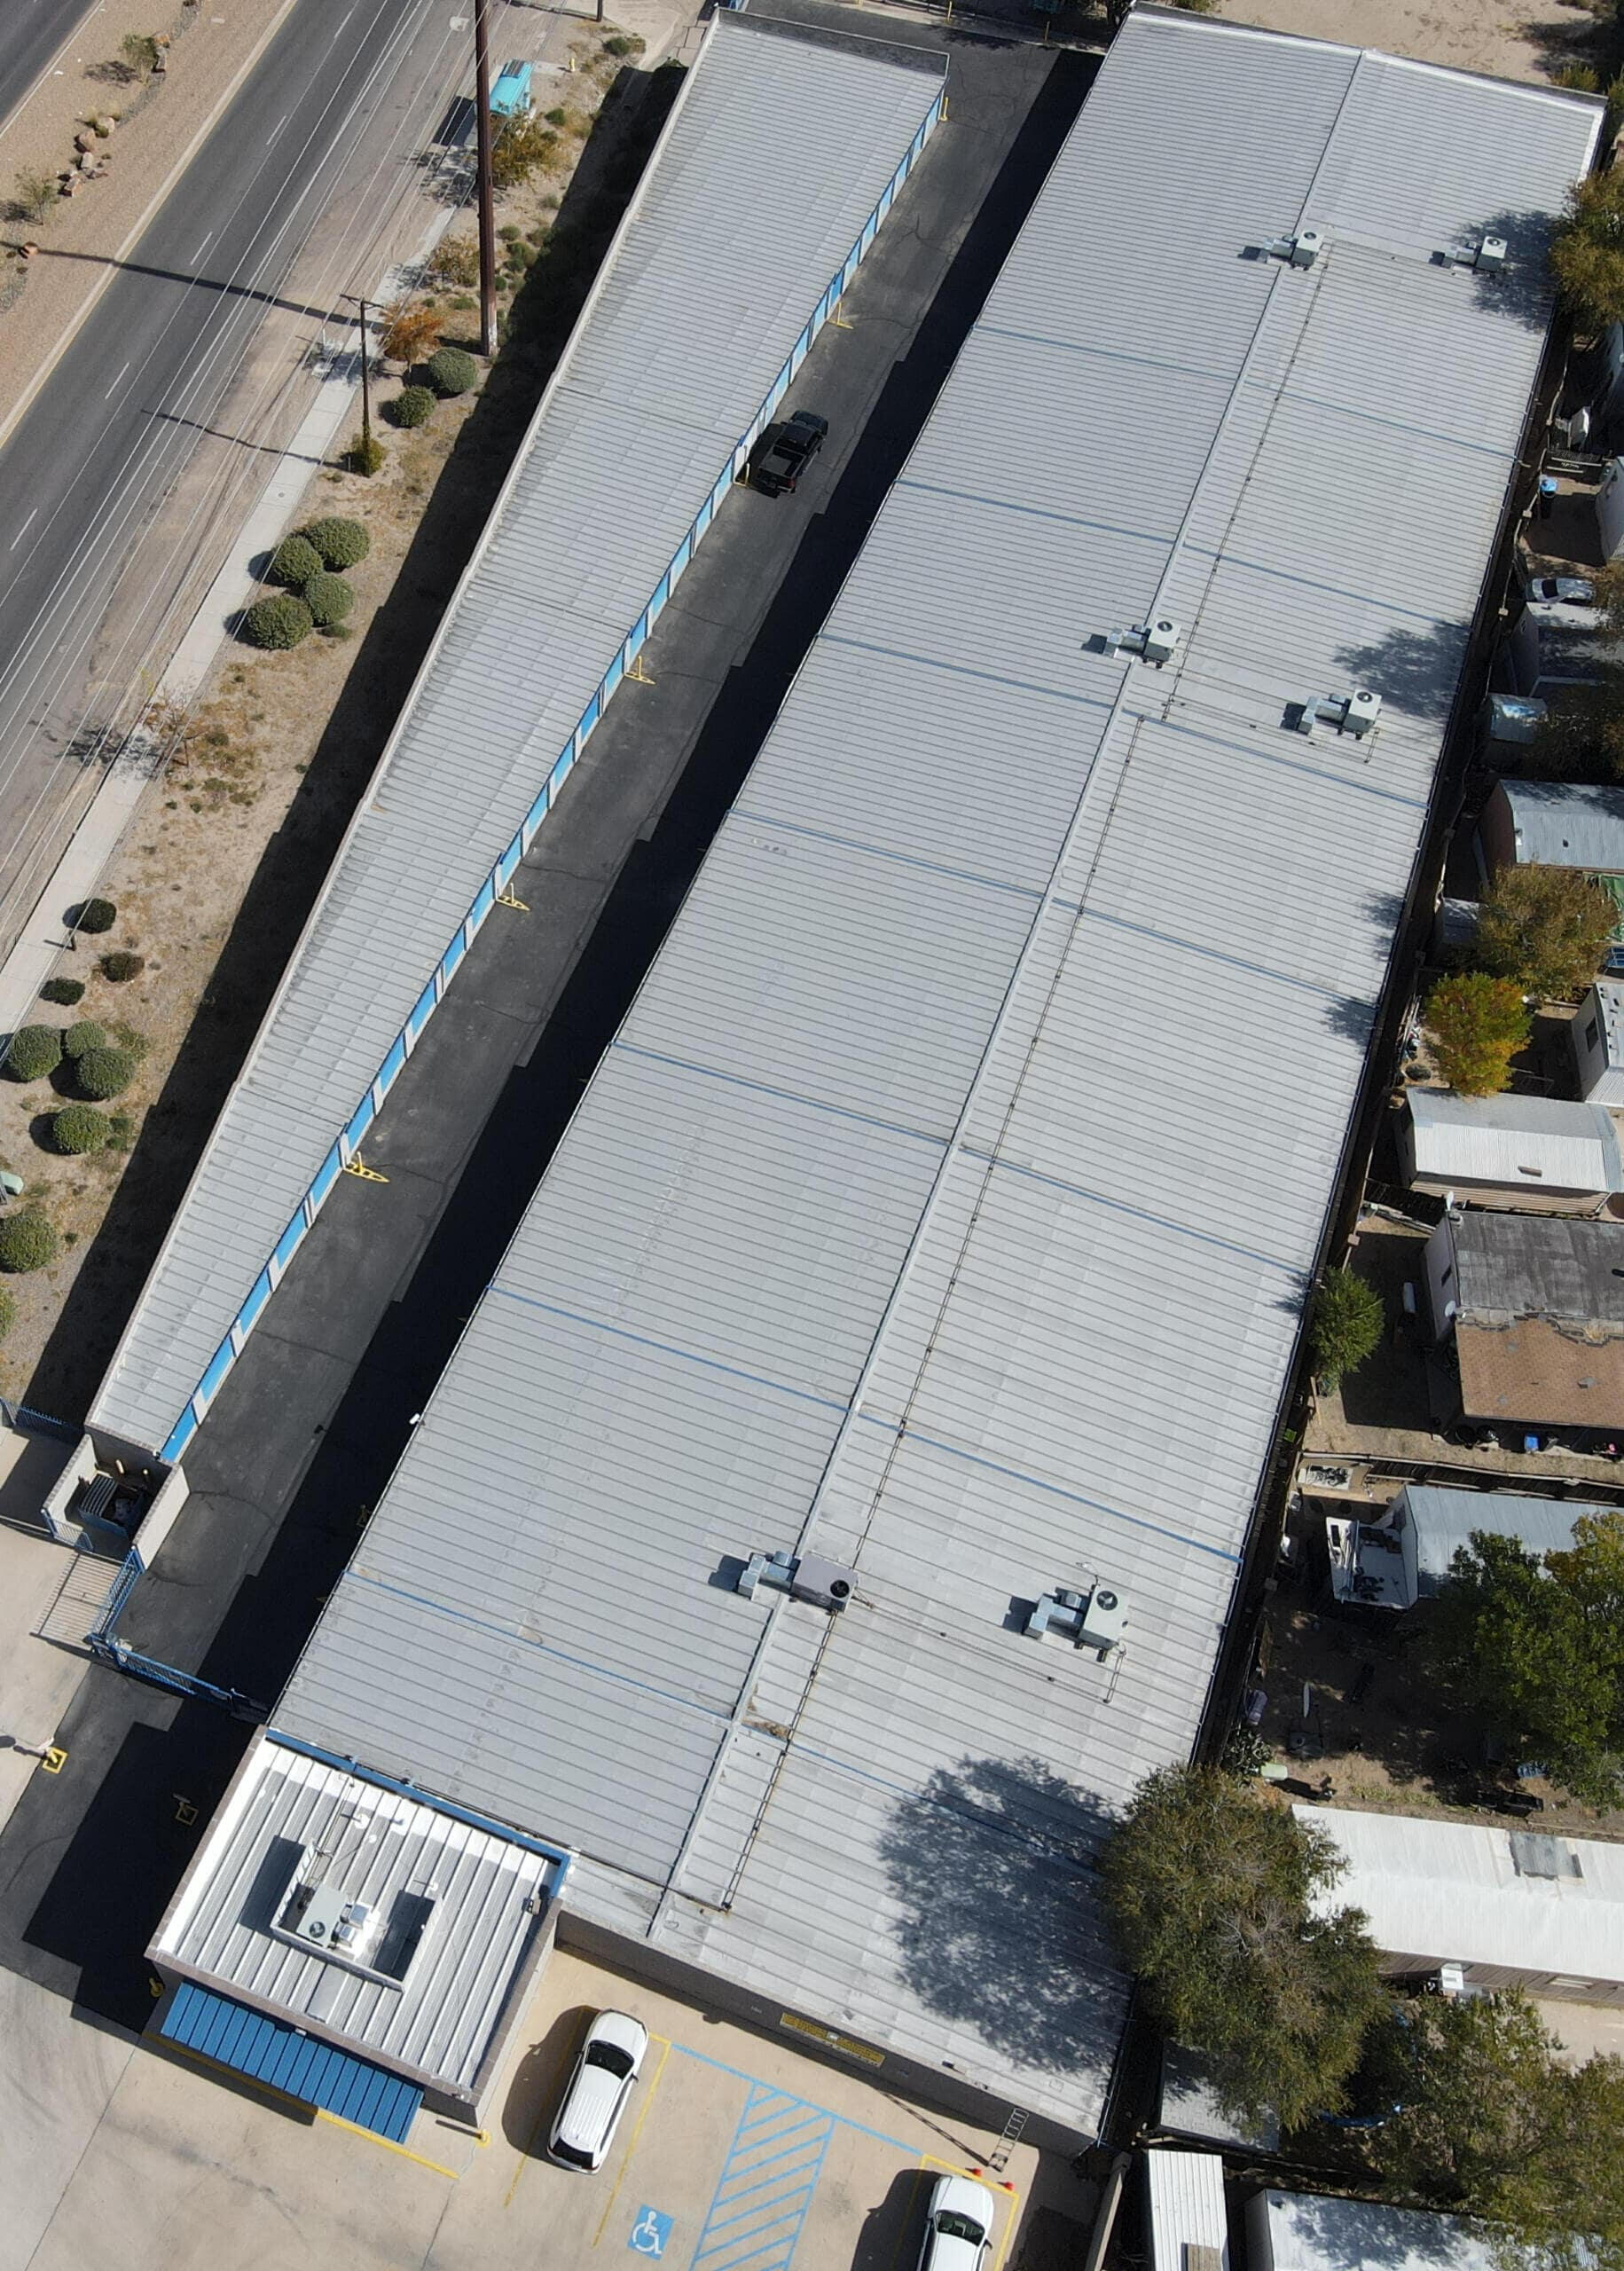 Repair work in progress on a metal roof of a large commercial storage facility located in Albuquerque, New Mexico.